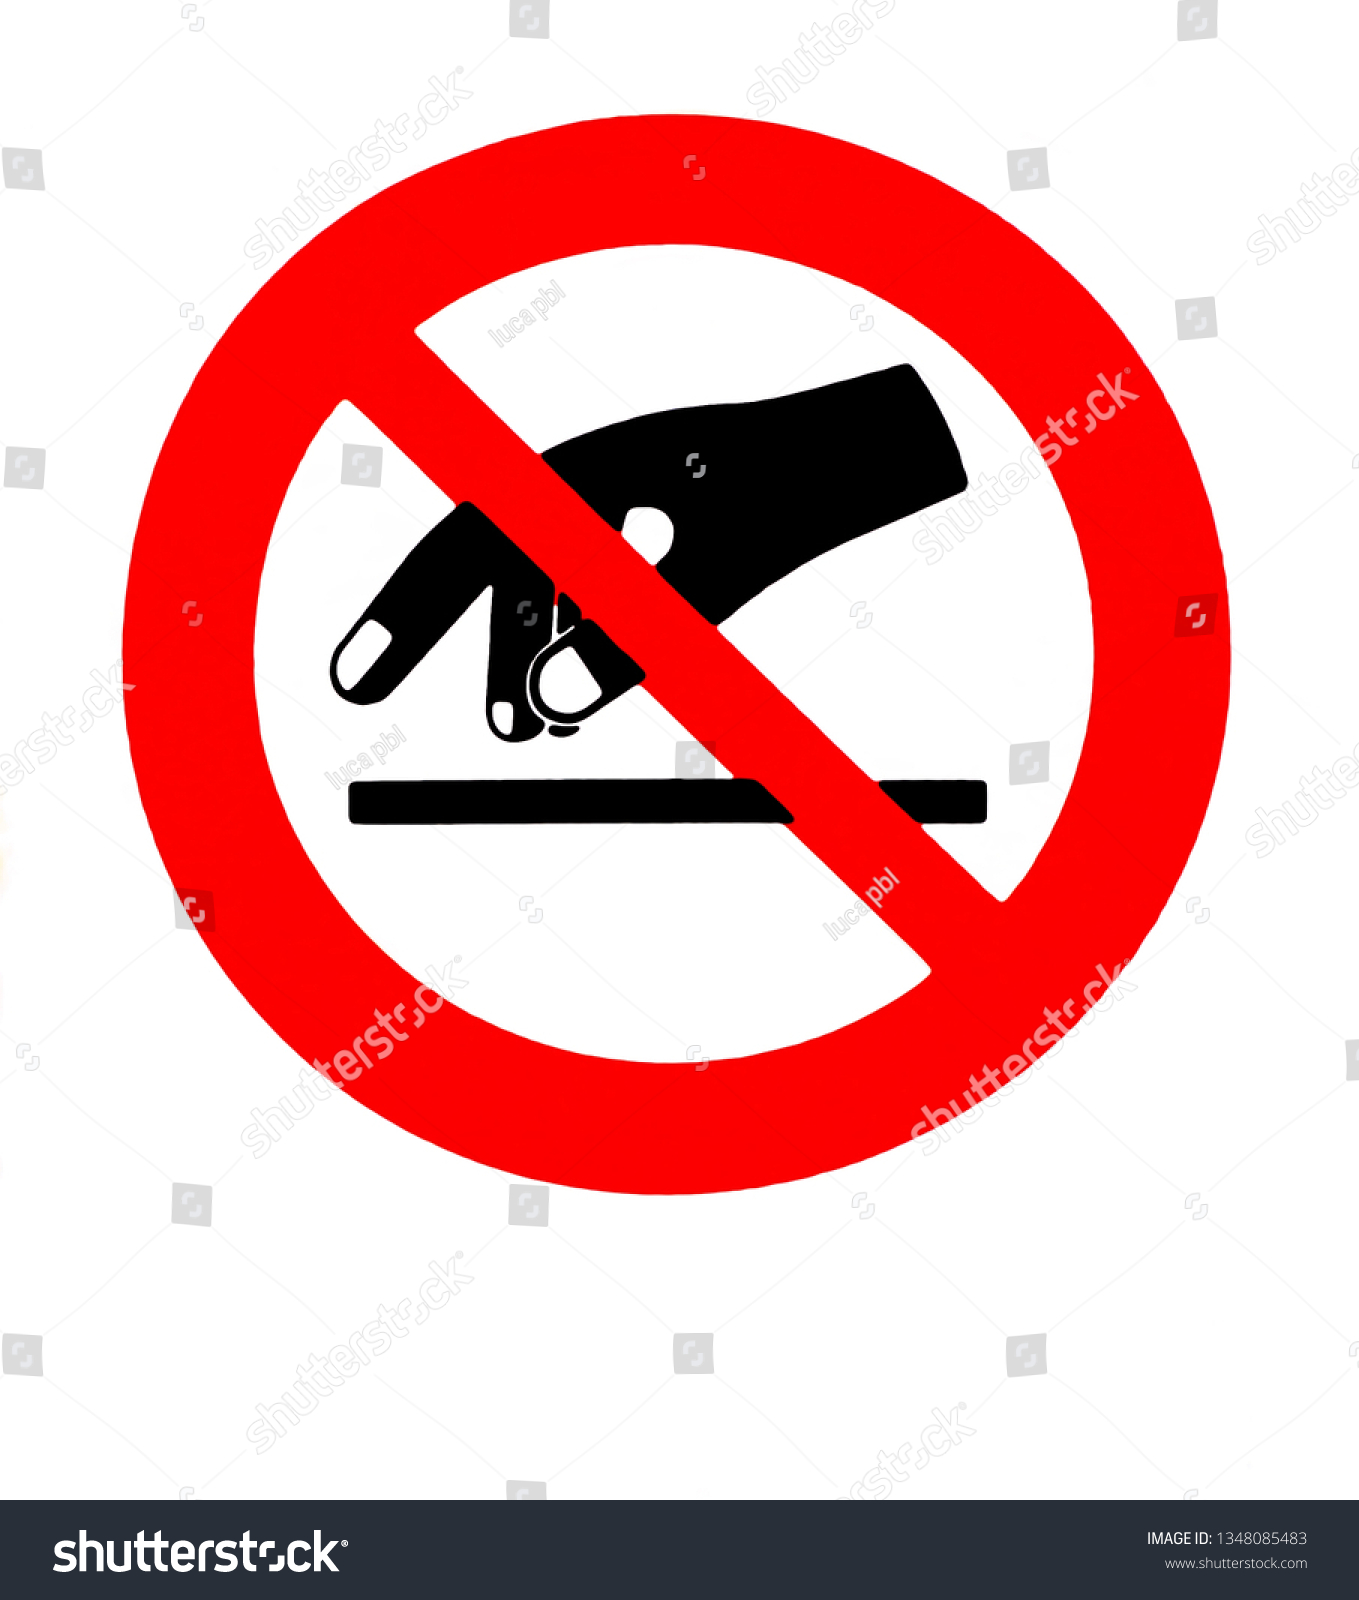 Do Not Touch Prohibition Safety Sign Stock Illustration 1348085483